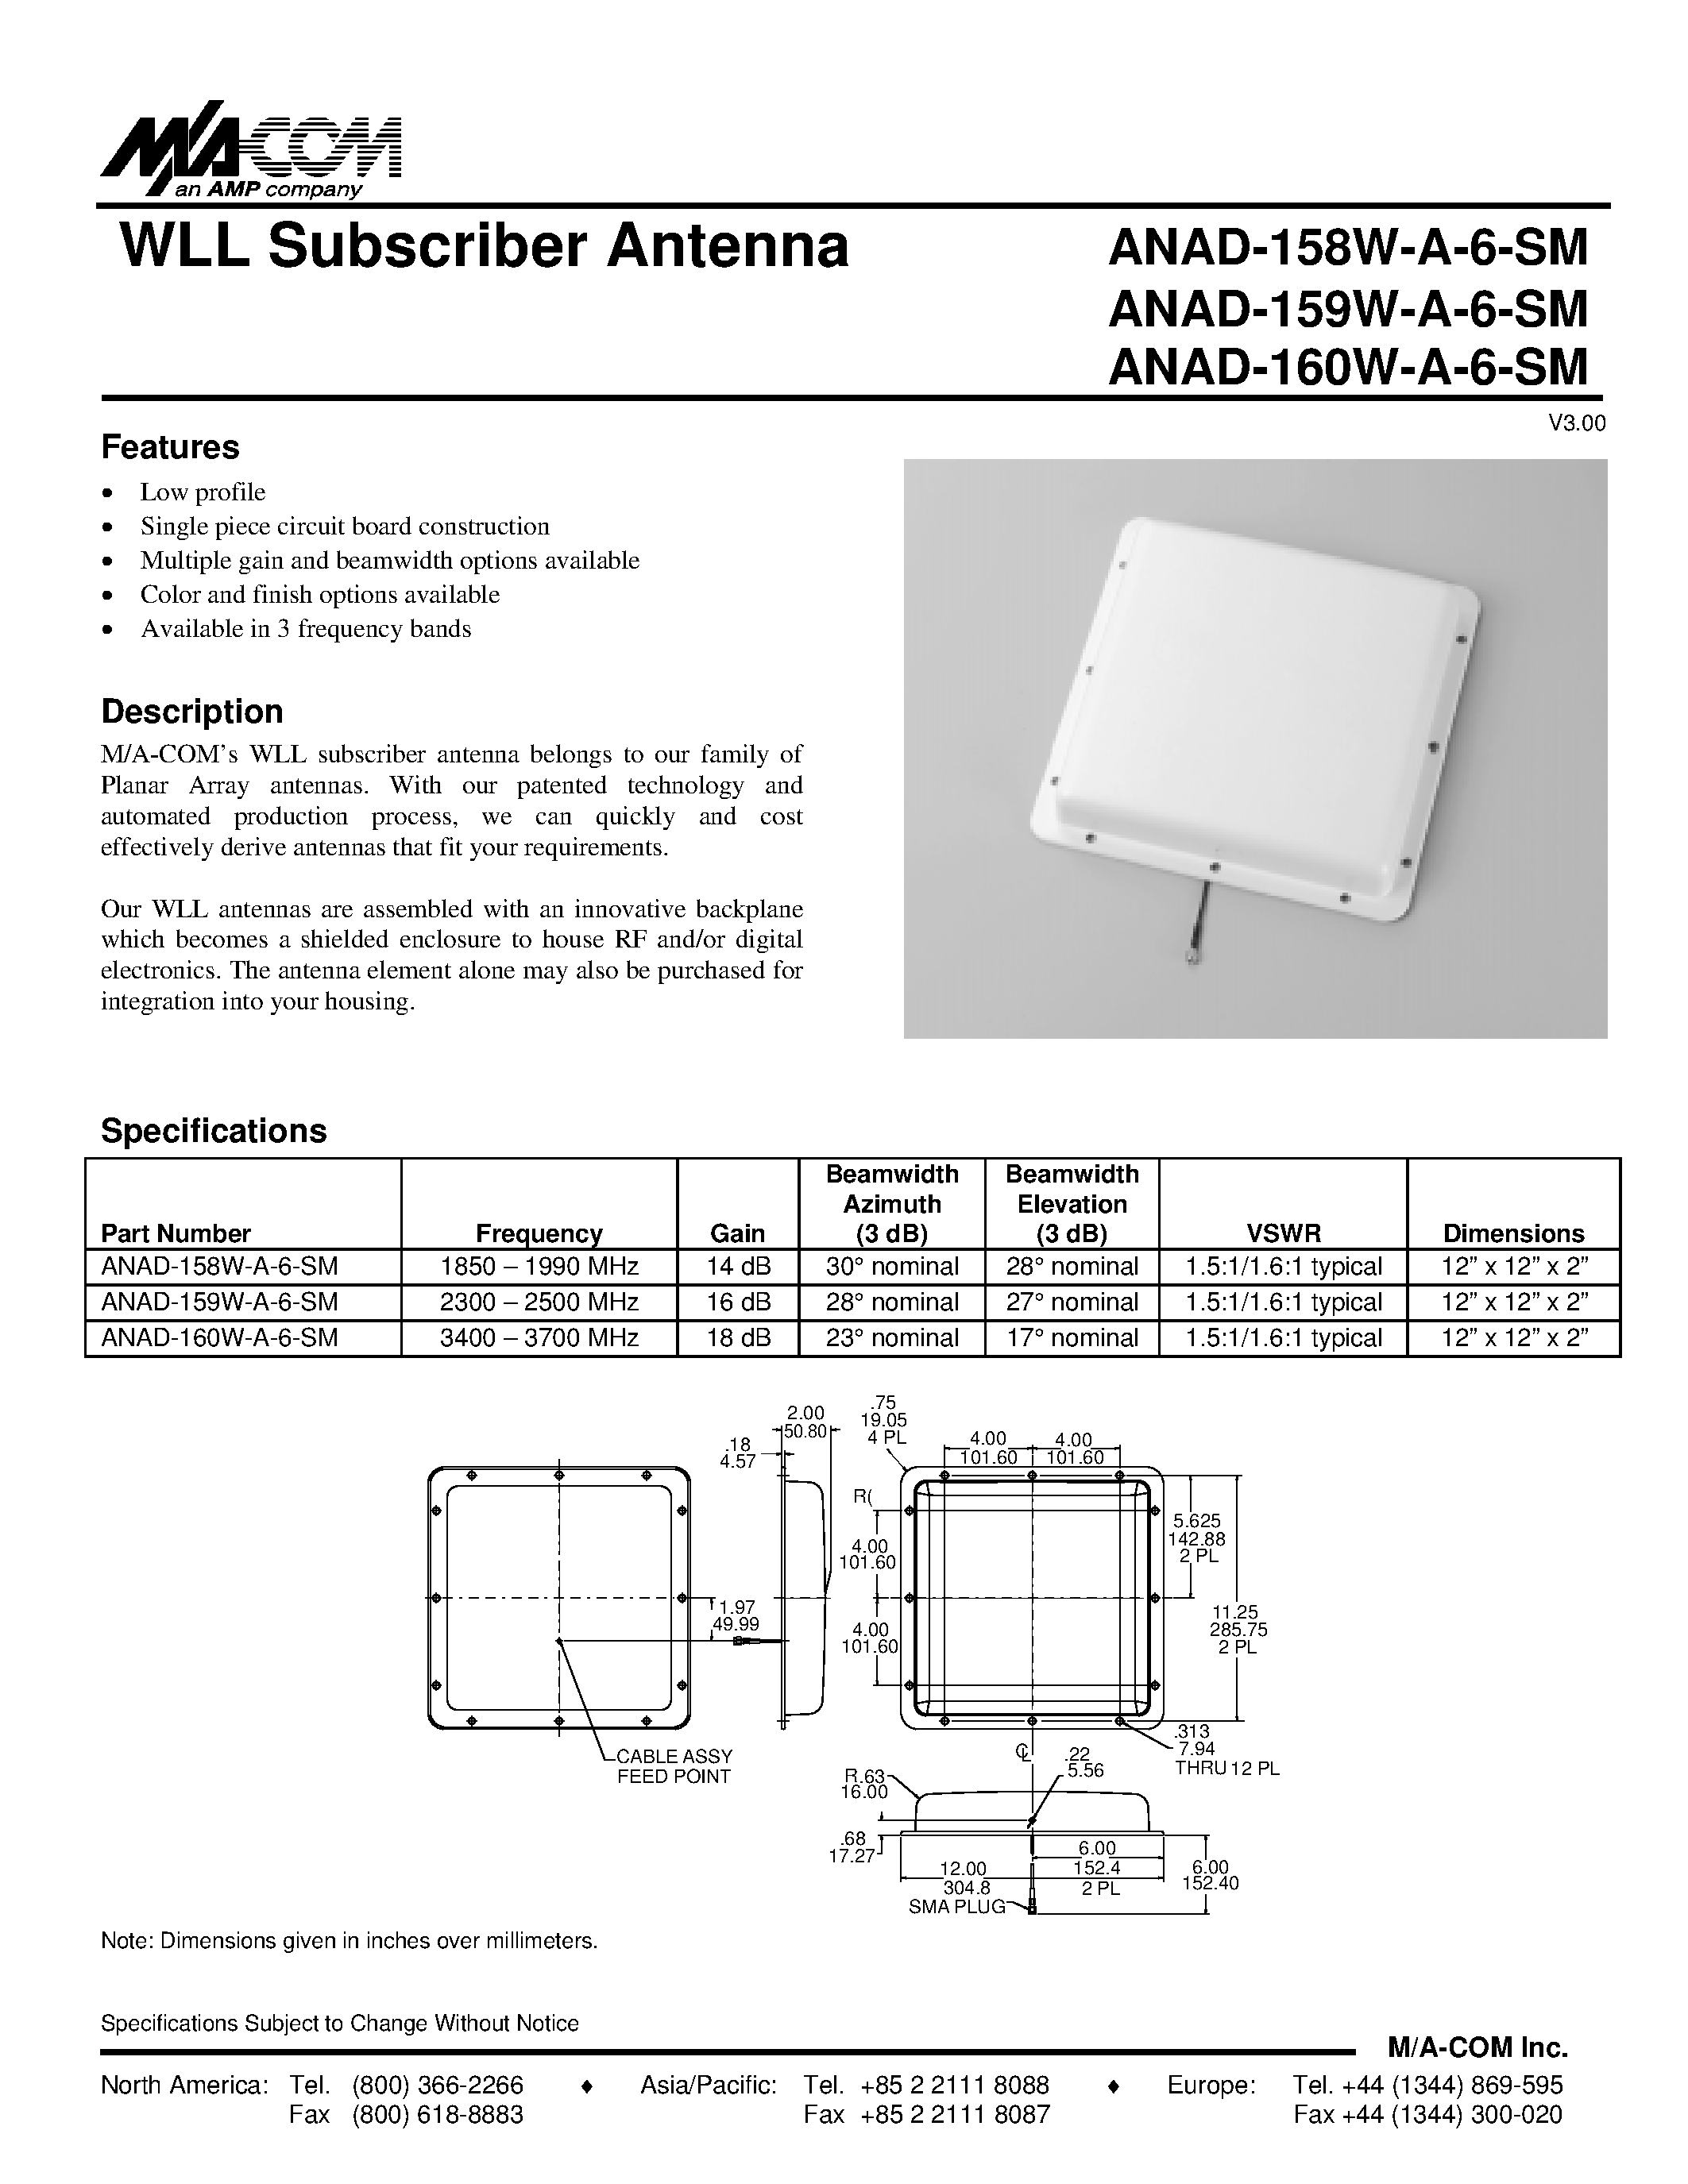 Datasheet ANAD-158W-A-6-SM - WLL Subscriber Antenna page 1